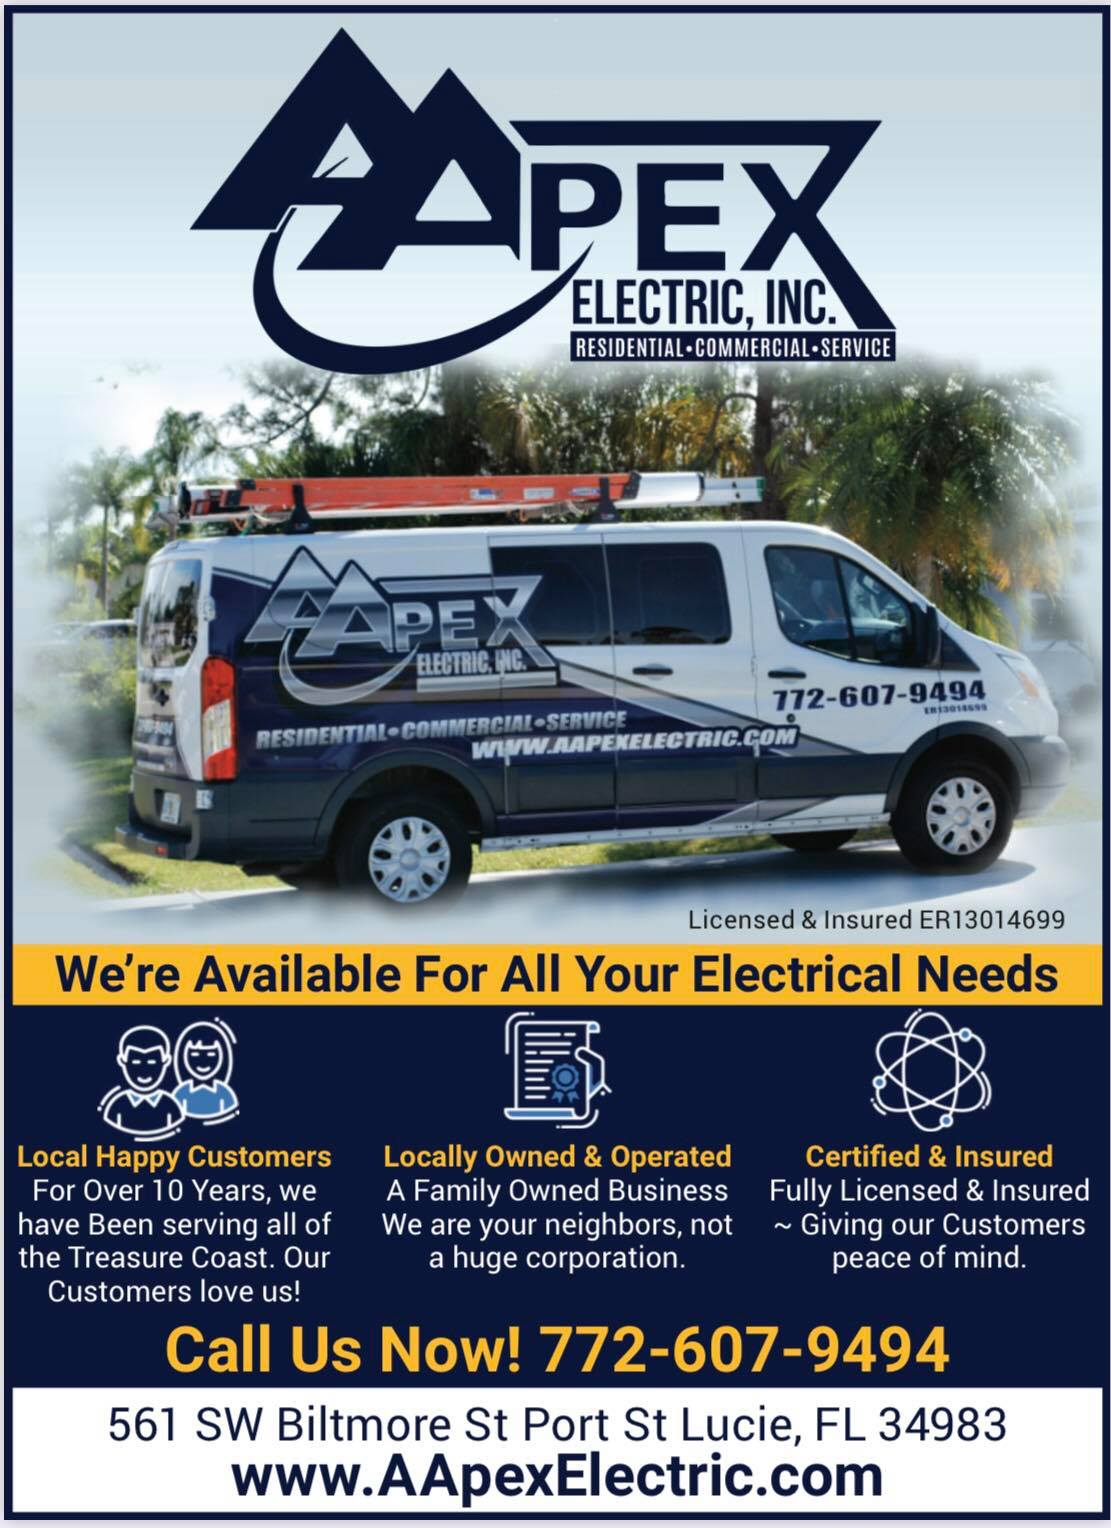 Aapex Electric Flyer